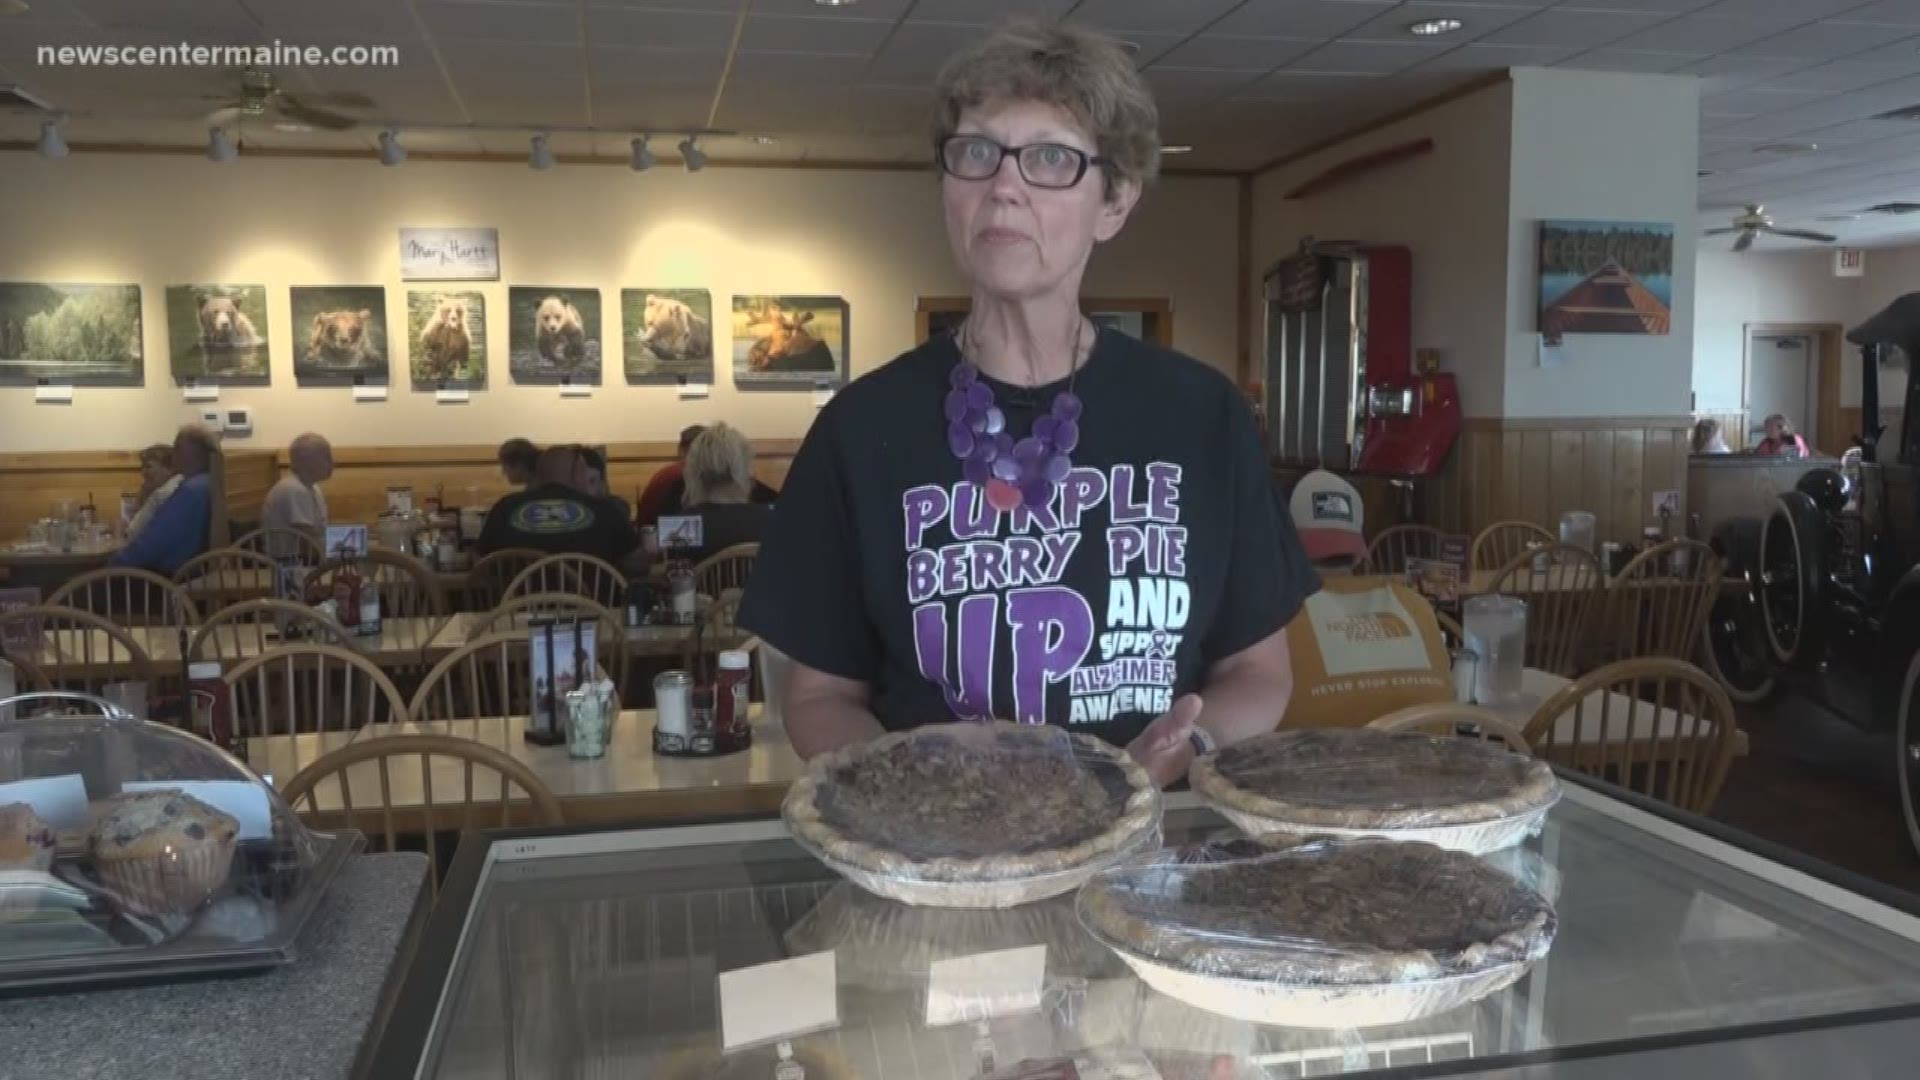 One of the owners of Dysarts is selling purple berry pies to benefit Alzheimer's charities.